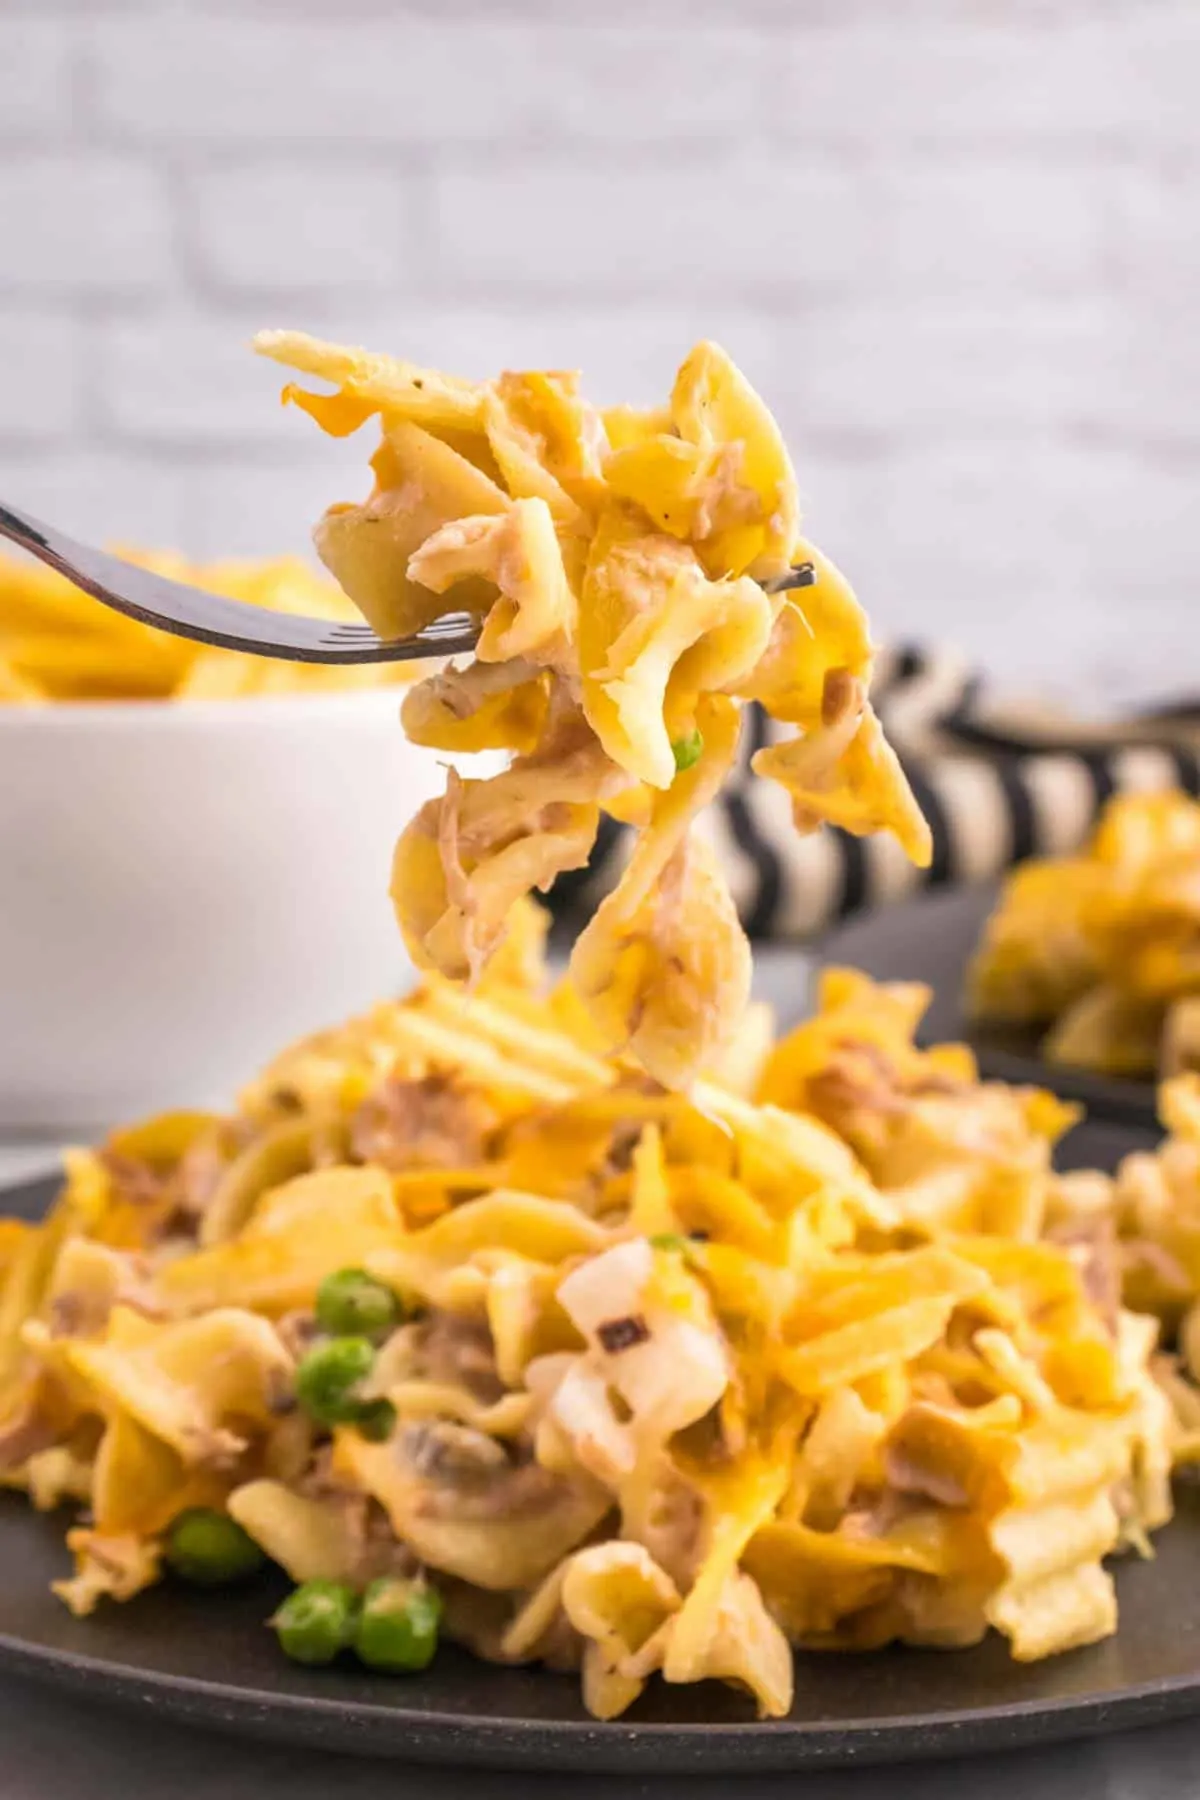 Tuna Casserole with Potato Chips is an easy dinner recipe loaded with egg noodles, canned tuna, peas, diced onions, cream of mushroom soup and shredded cheddar cheese with a crushed potato chip topping.